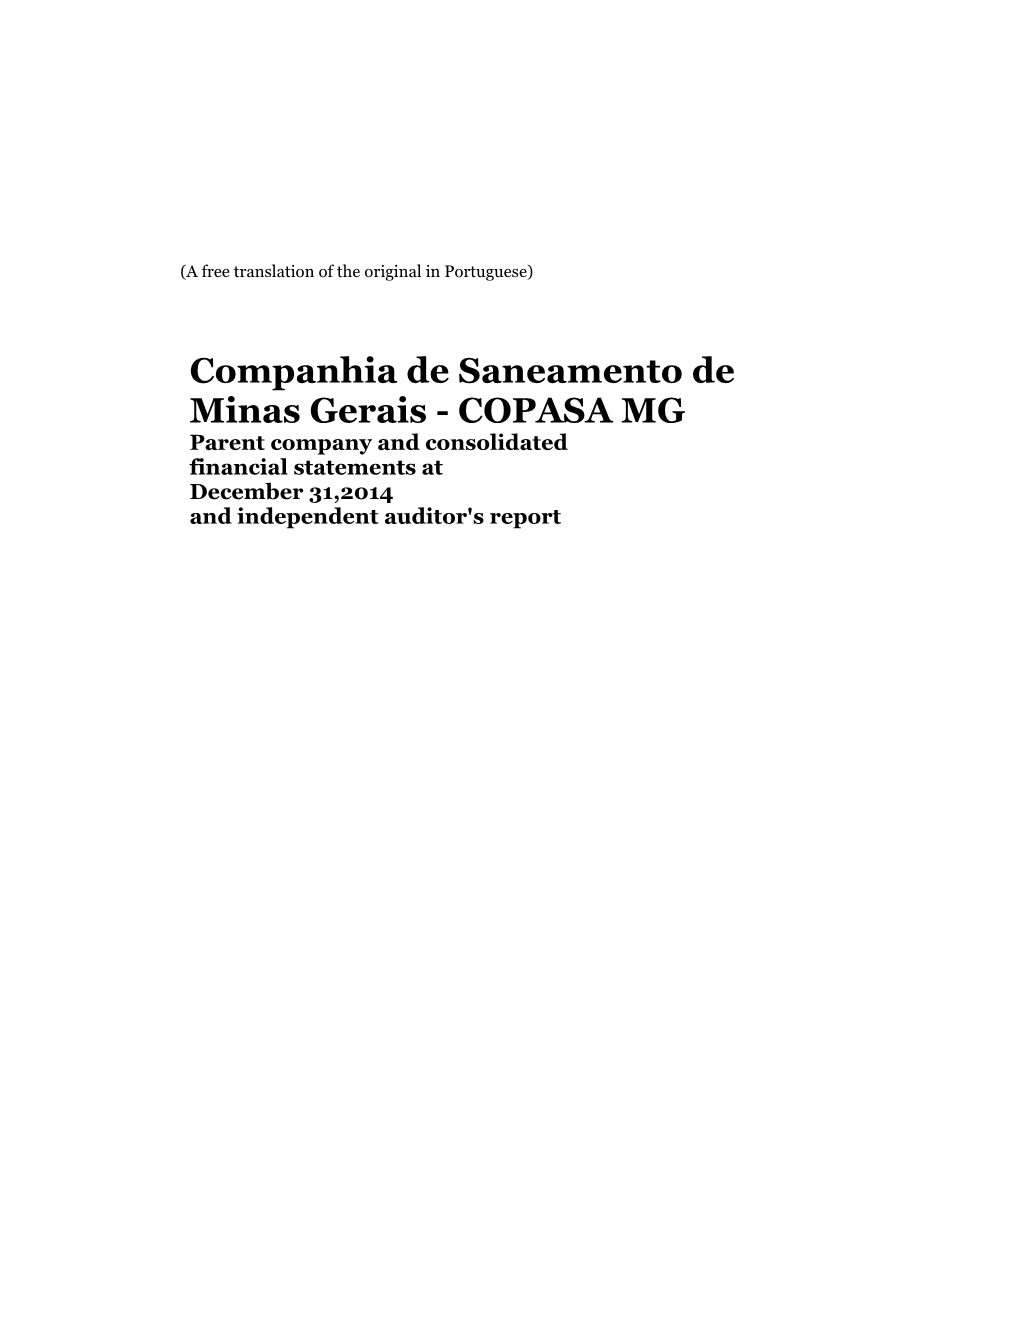 COPASA MG Parent Company and Consolidated Financial Statements at December 31,2014 and Independent Auditor's Report (A Free Translation of the Original in Portuguese)